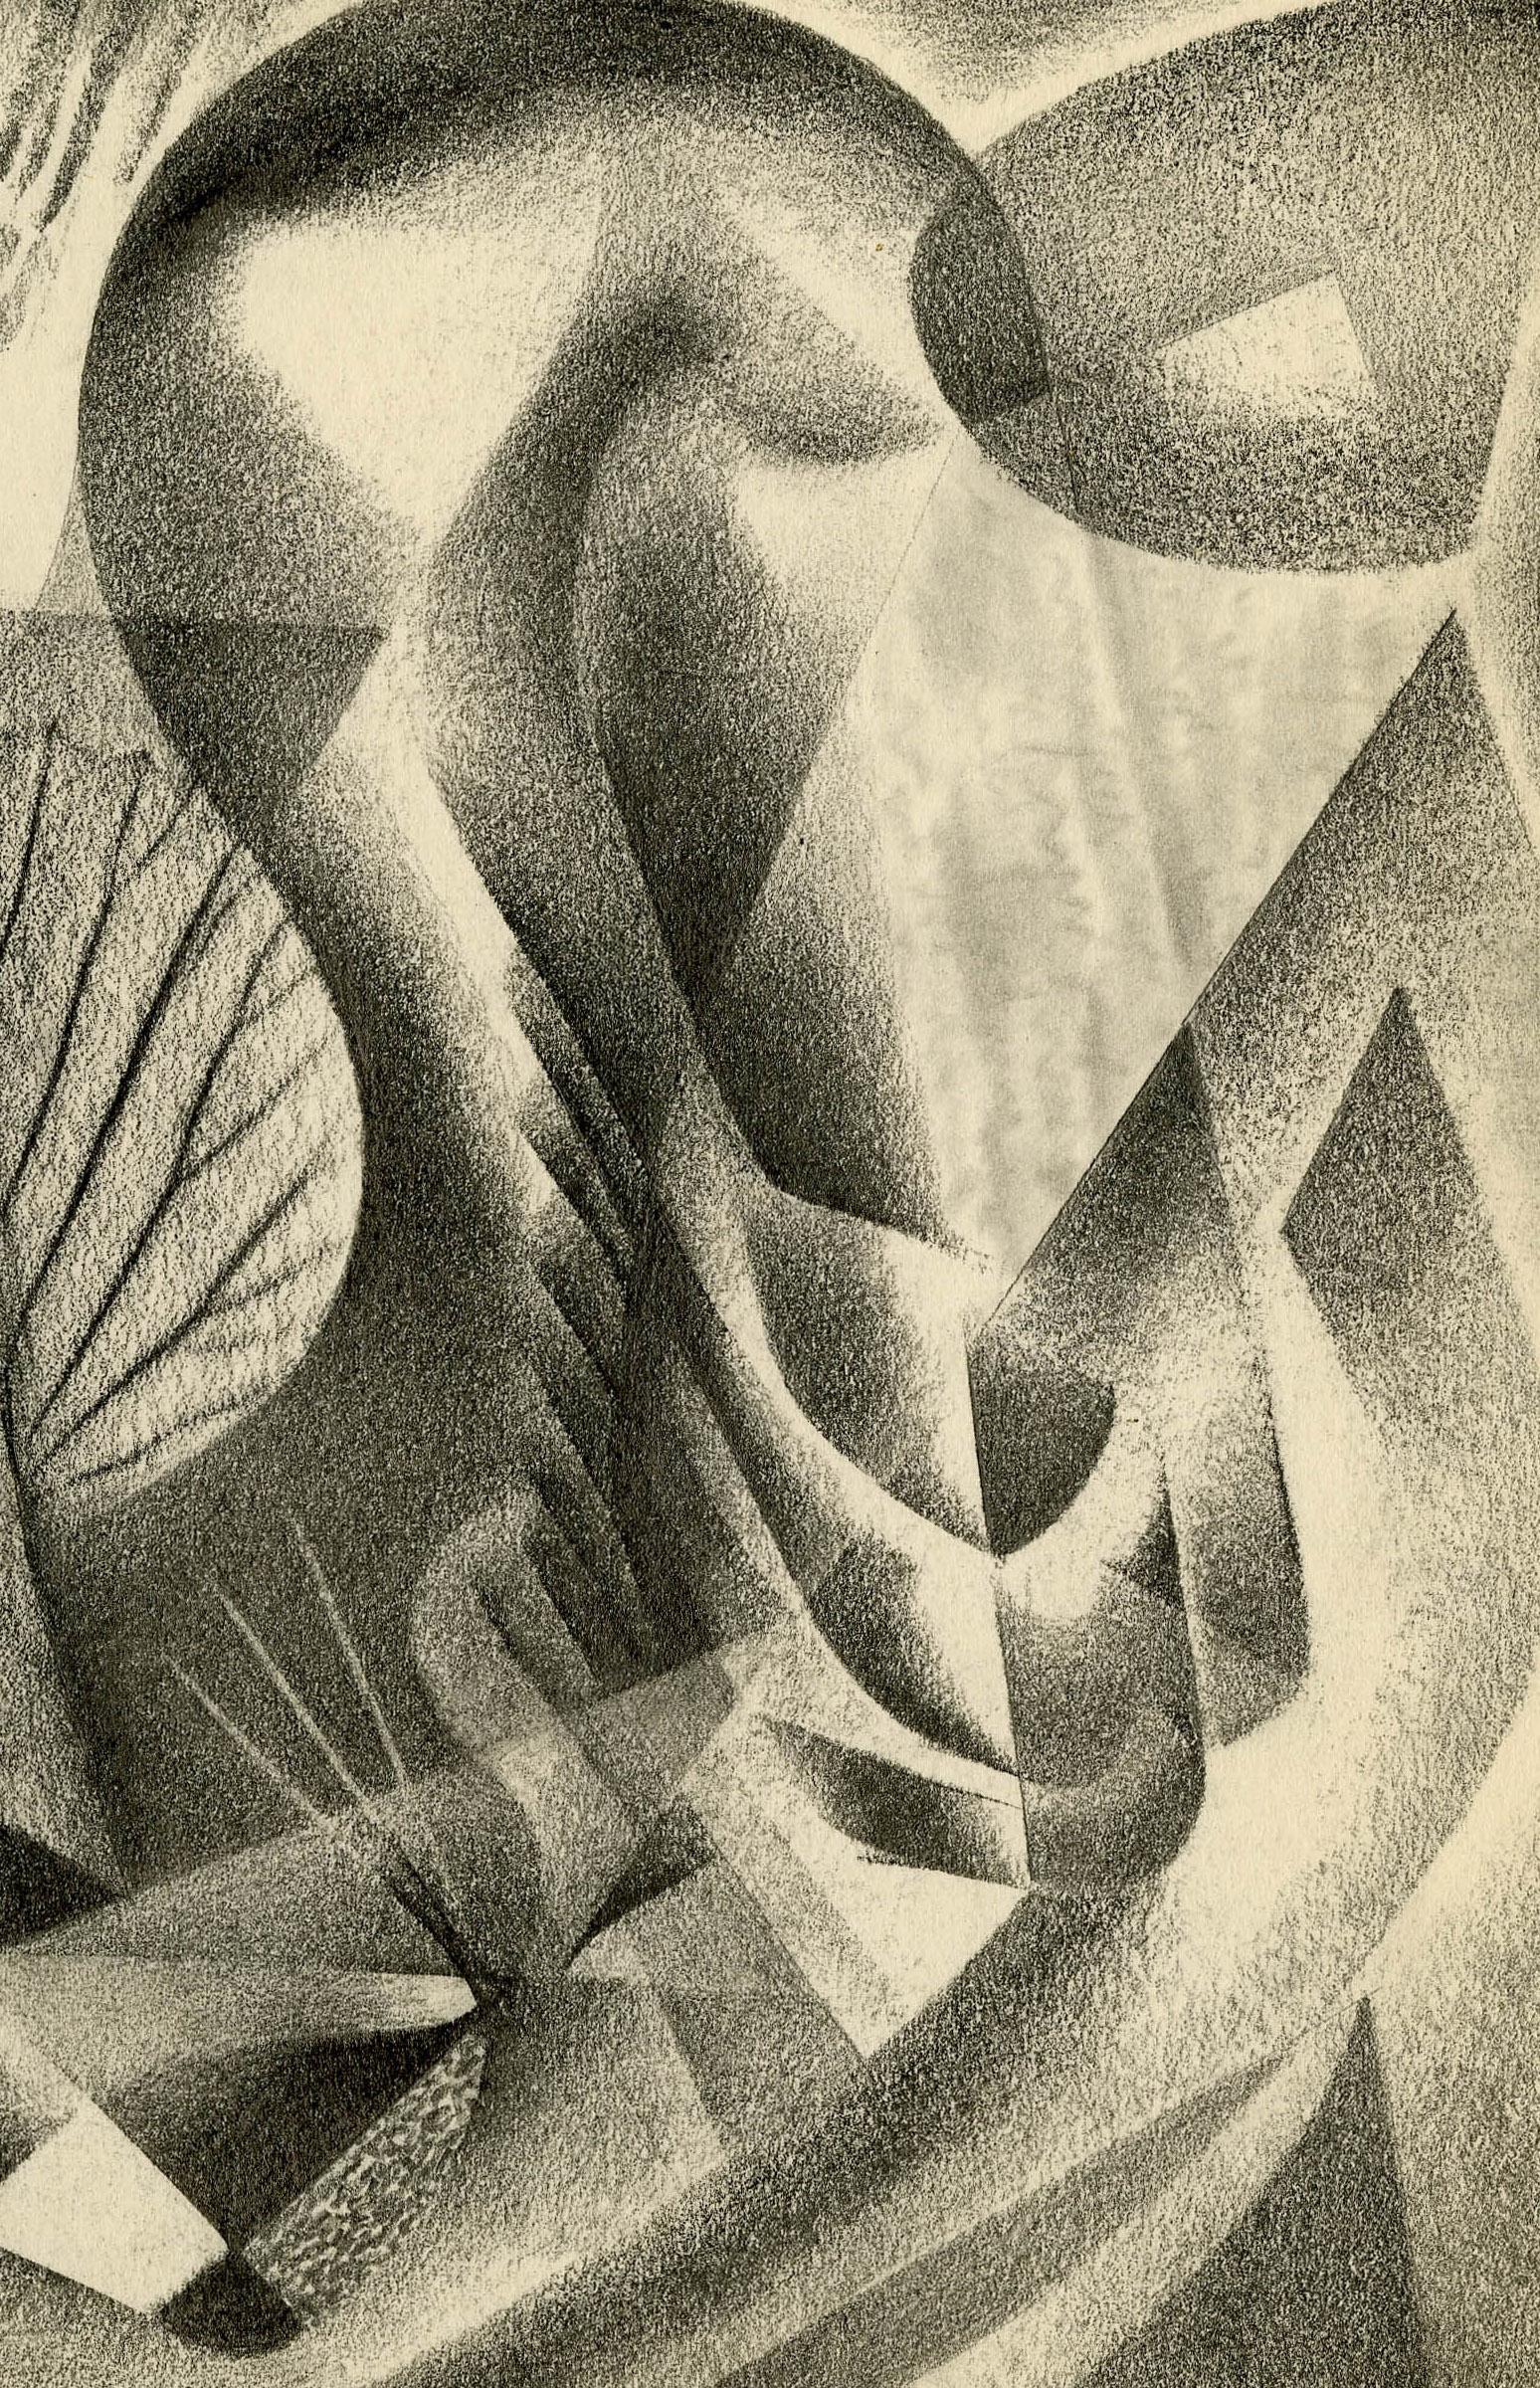 Untitled Abstraction
Graphite on paper, c. 1945
Signed on image left of center
Condition: Excellent
Sheet/Image size: 9 7/8 x 14 1/8 inches
Provenance: Estate of the Artist
                      Inherit by his neighbor/caregiver
Medard Klein was